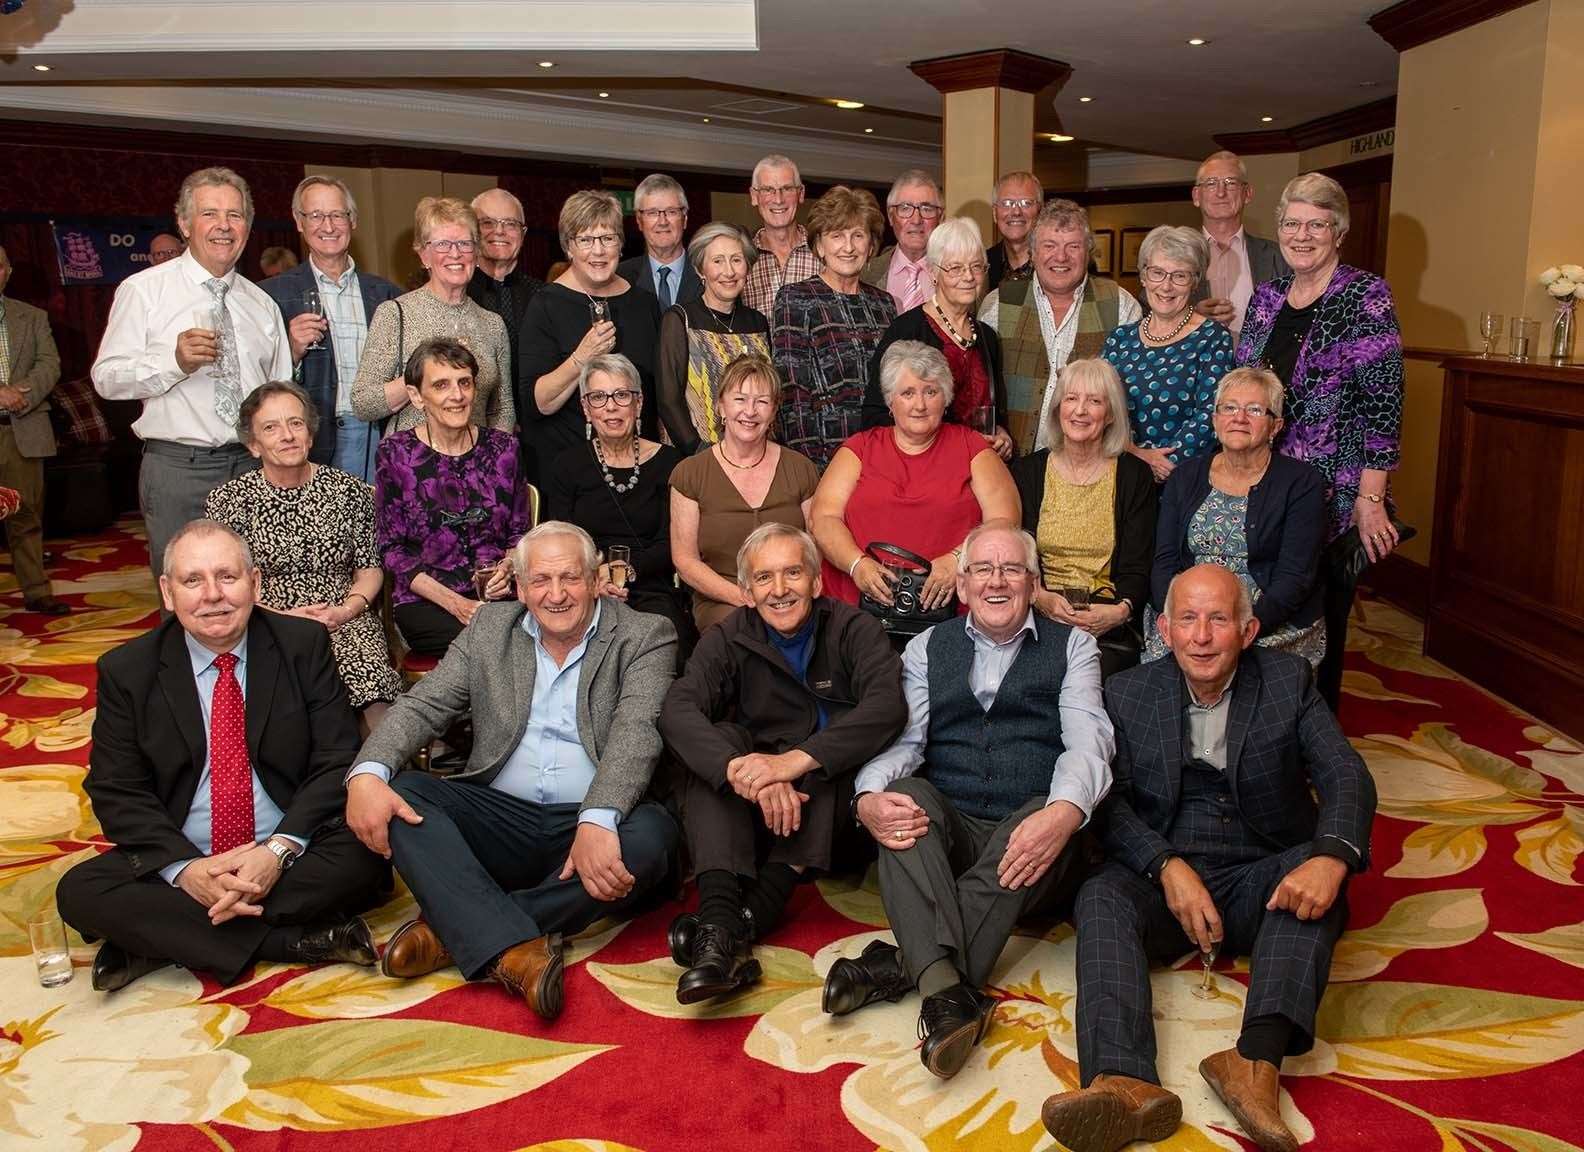 Many familiar faces from the Nairn Academy Class of '72 school leavers at the Newton Hotel.